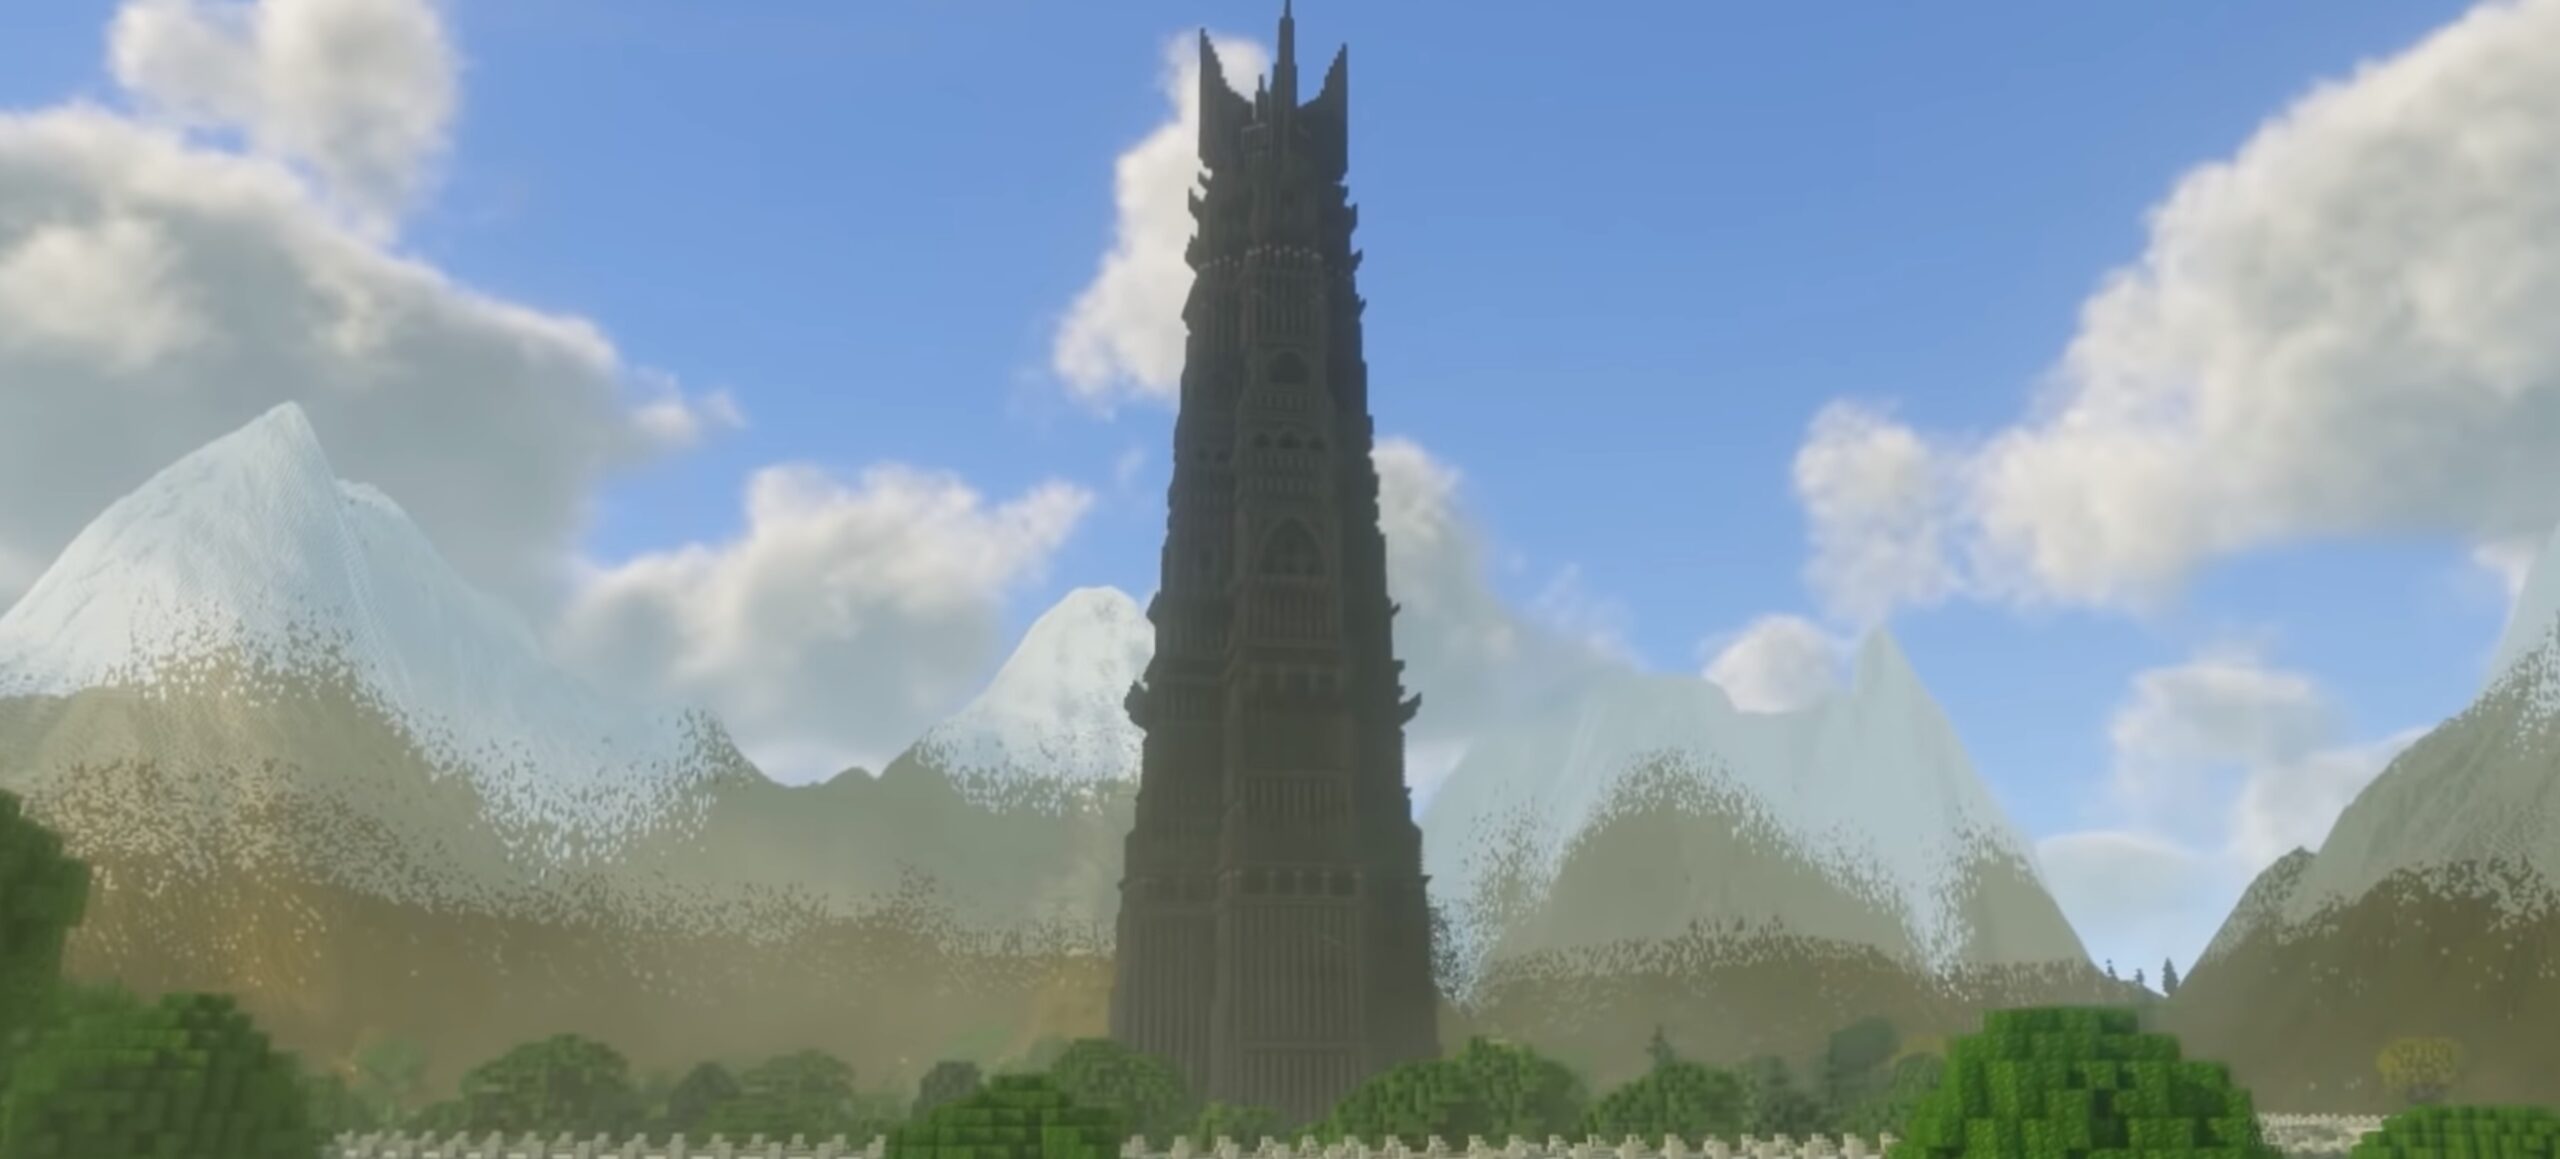 Incredible Minecraft Middle Earth World